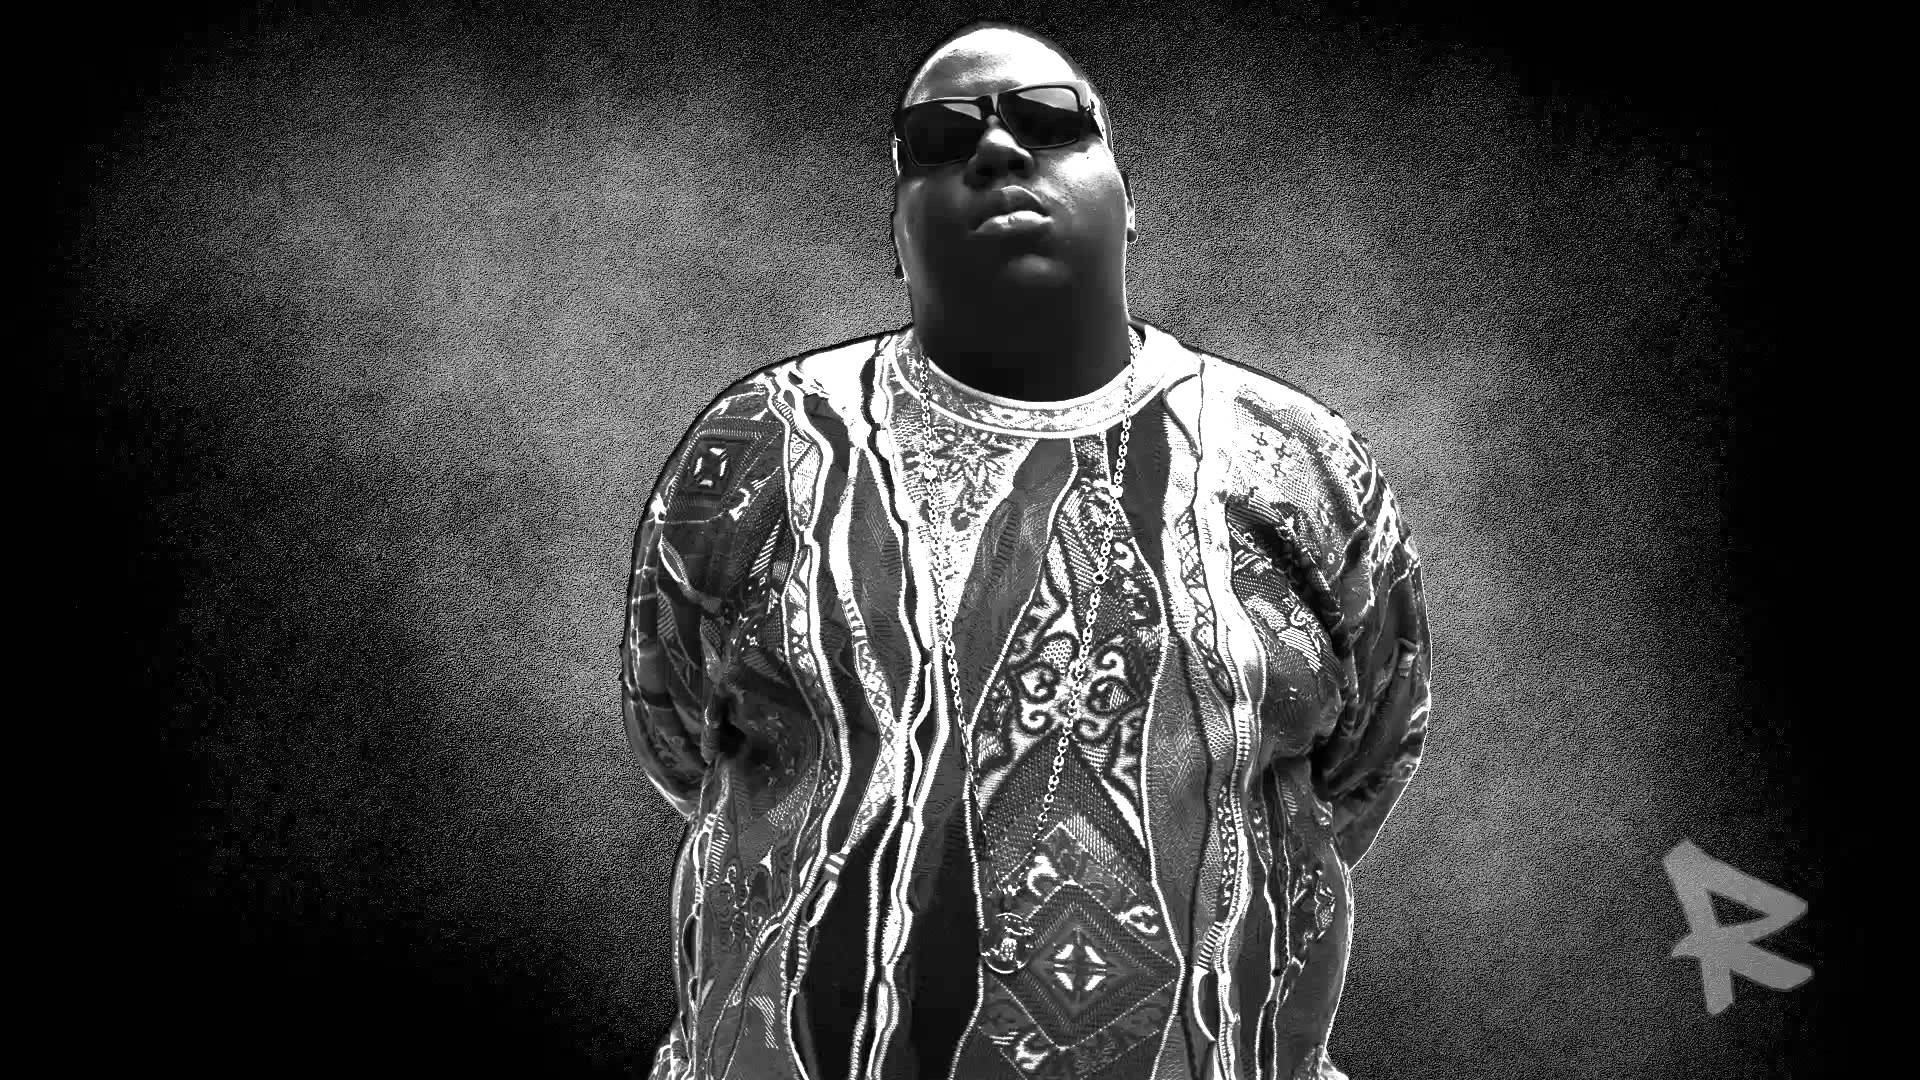 Notorious B I G Wallpaper Image Photos Pictures Background